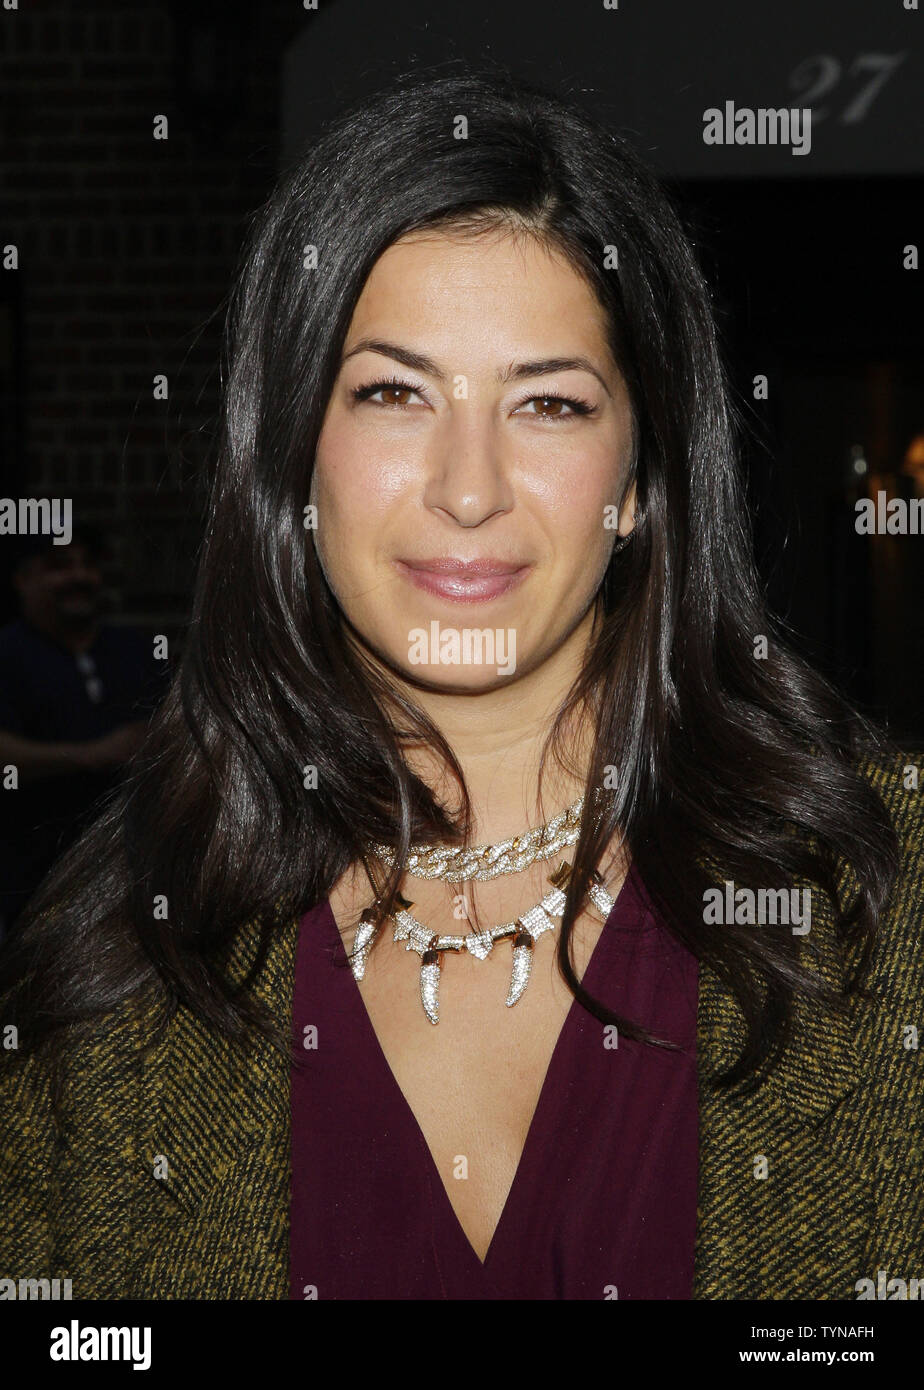 Rebecca Minkoff arrives at Cosmopolitan's  'The Cosmo 100'  featuring New York City's 100 Most Powerful Women at Michael's Restaurant in New York City on November 12, 2012.       UPI/John Angelillo Stock Photo